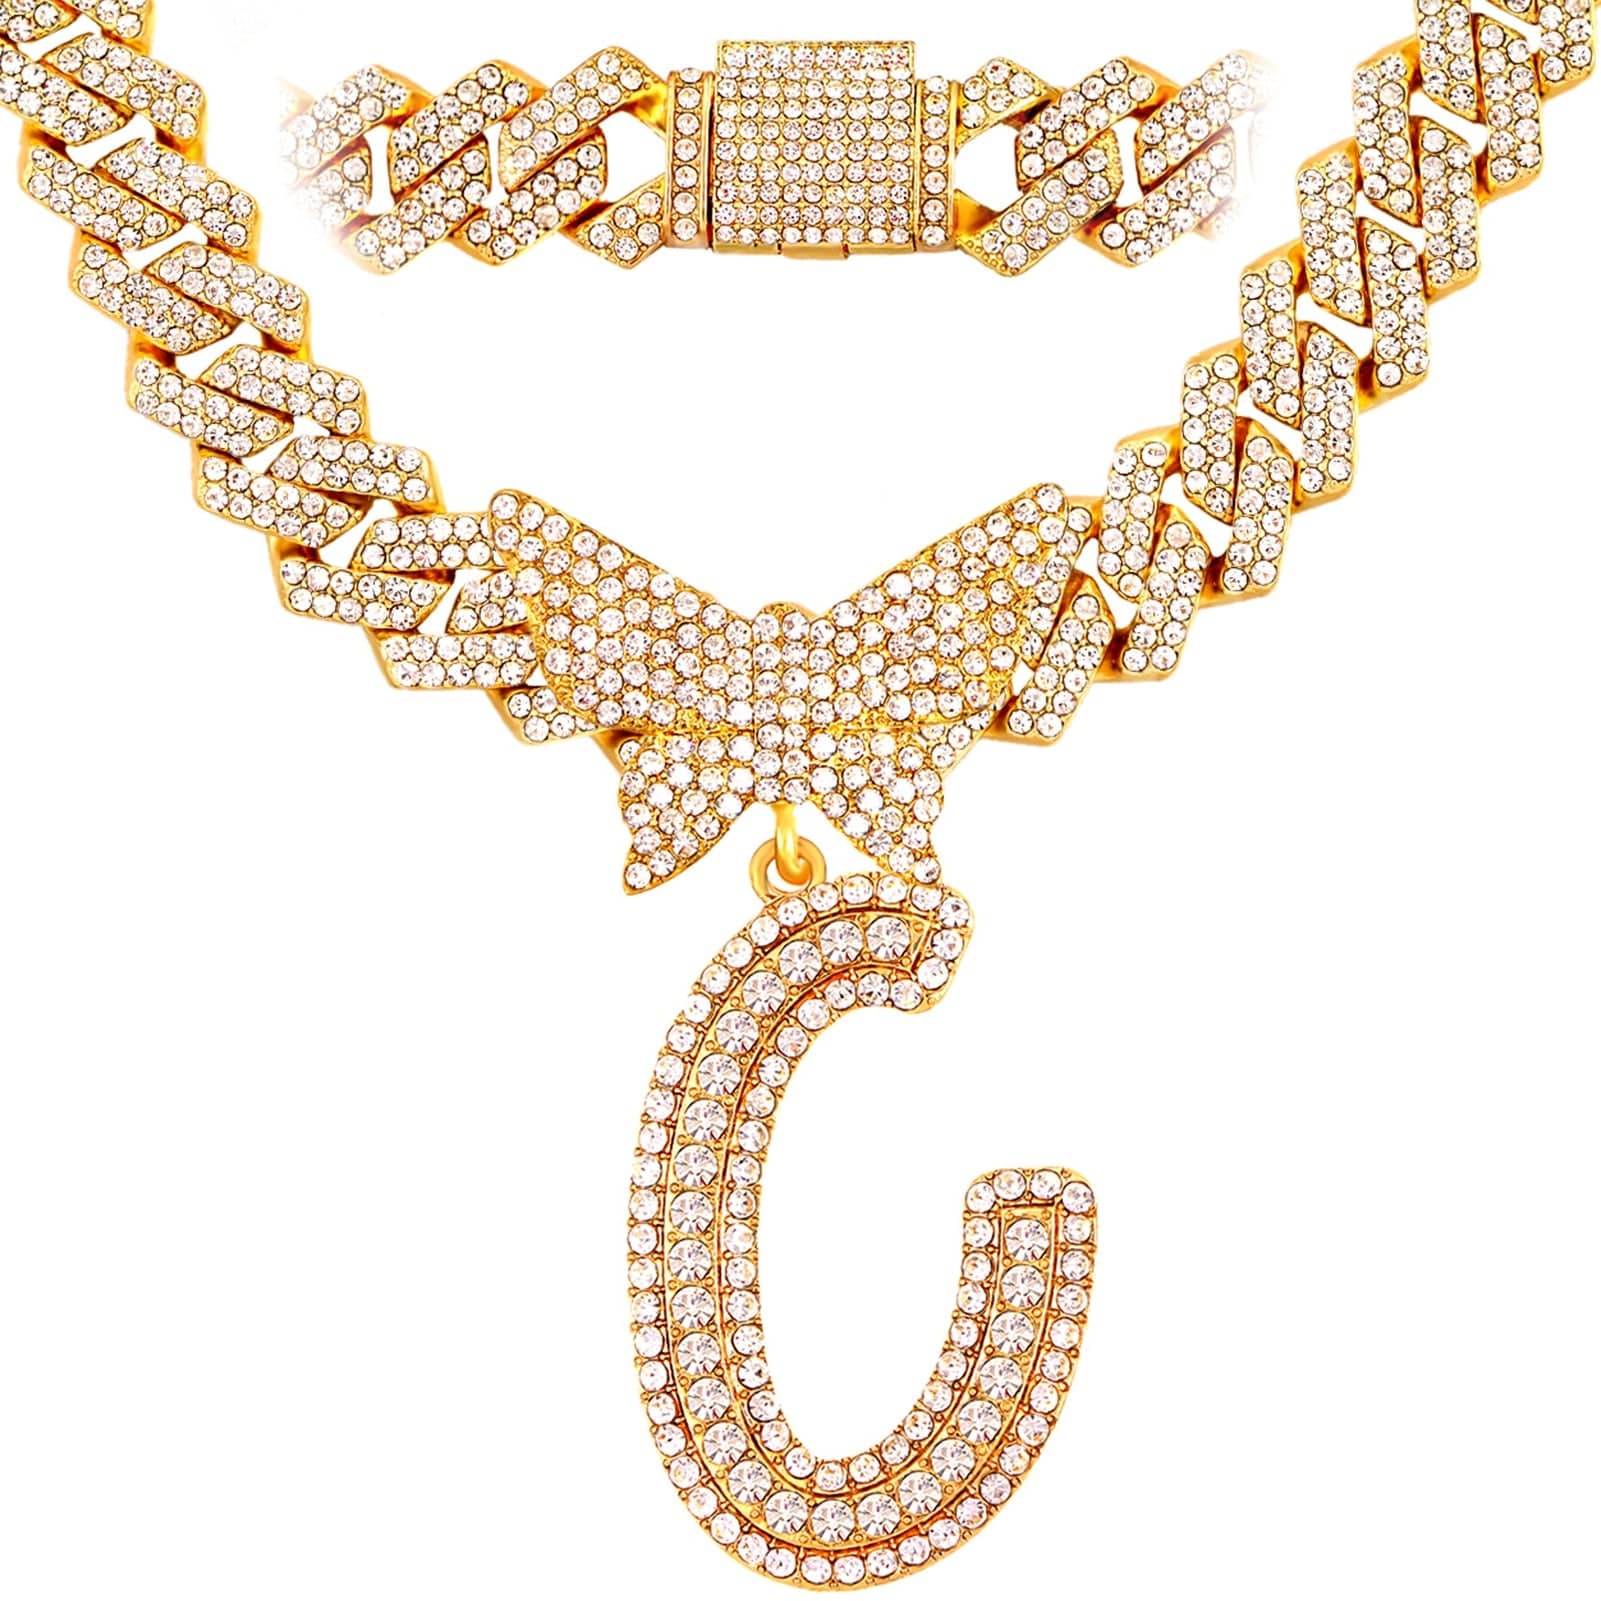 VVS Jewelry hip hop jewelry C / Gold Bling Butterfly Letter Cuban Link Chain